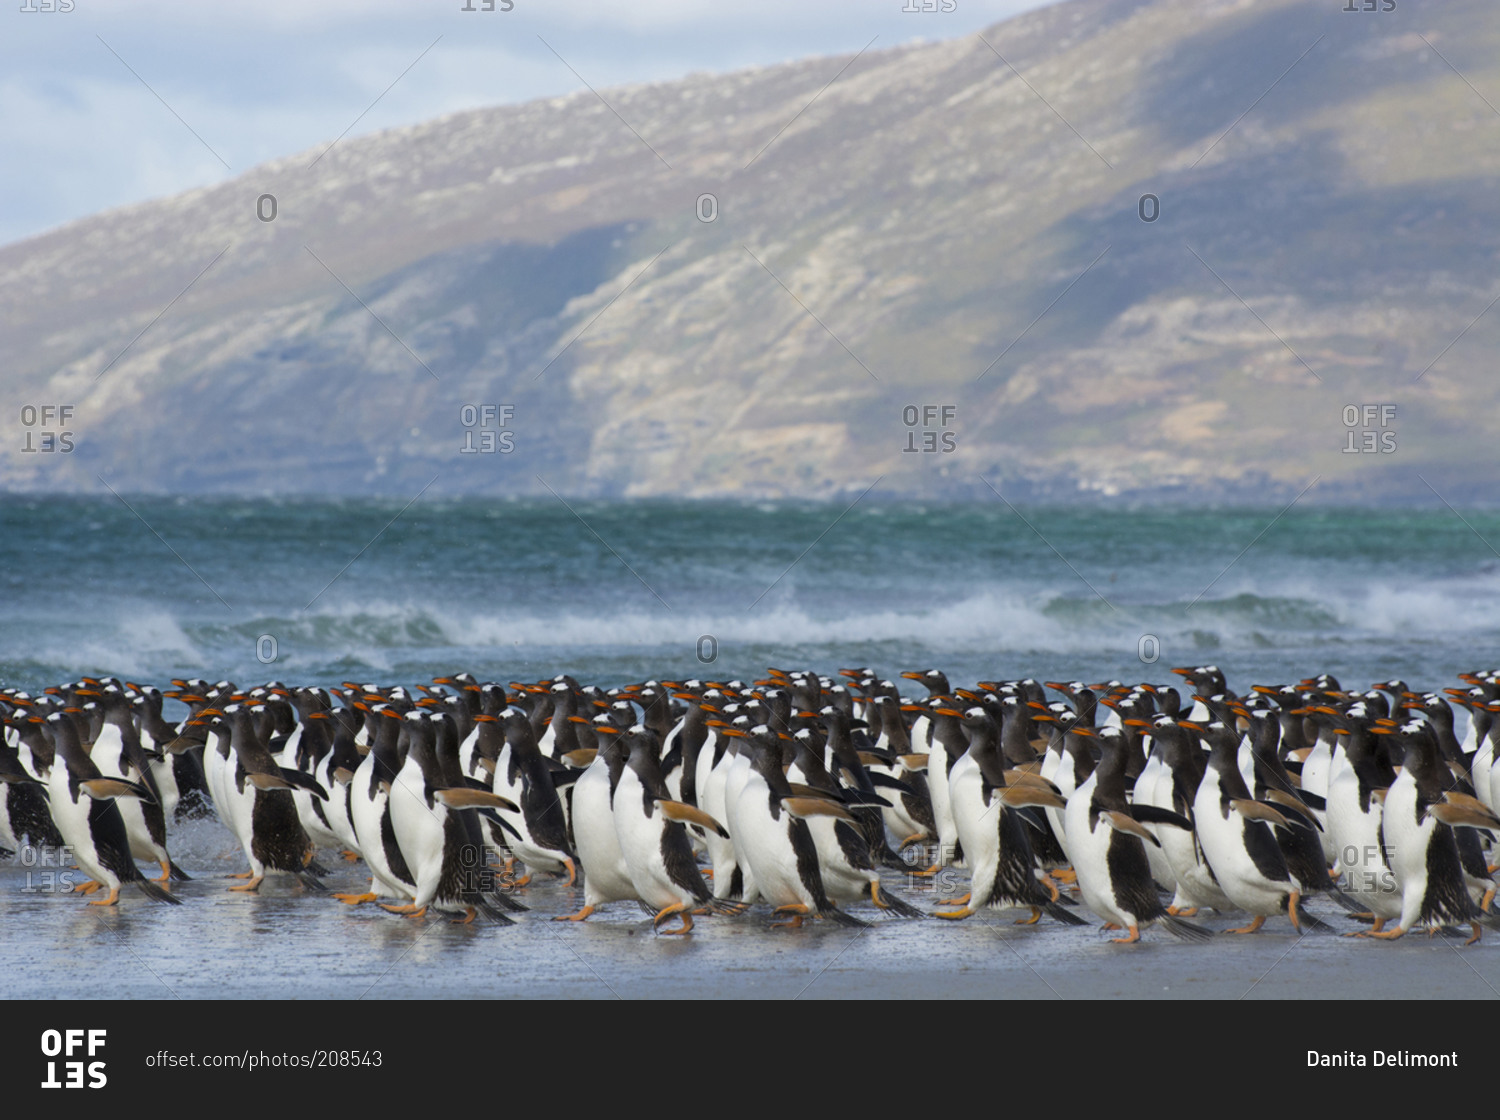 Gentoo penguins rushing into the water on the Falkland Islands